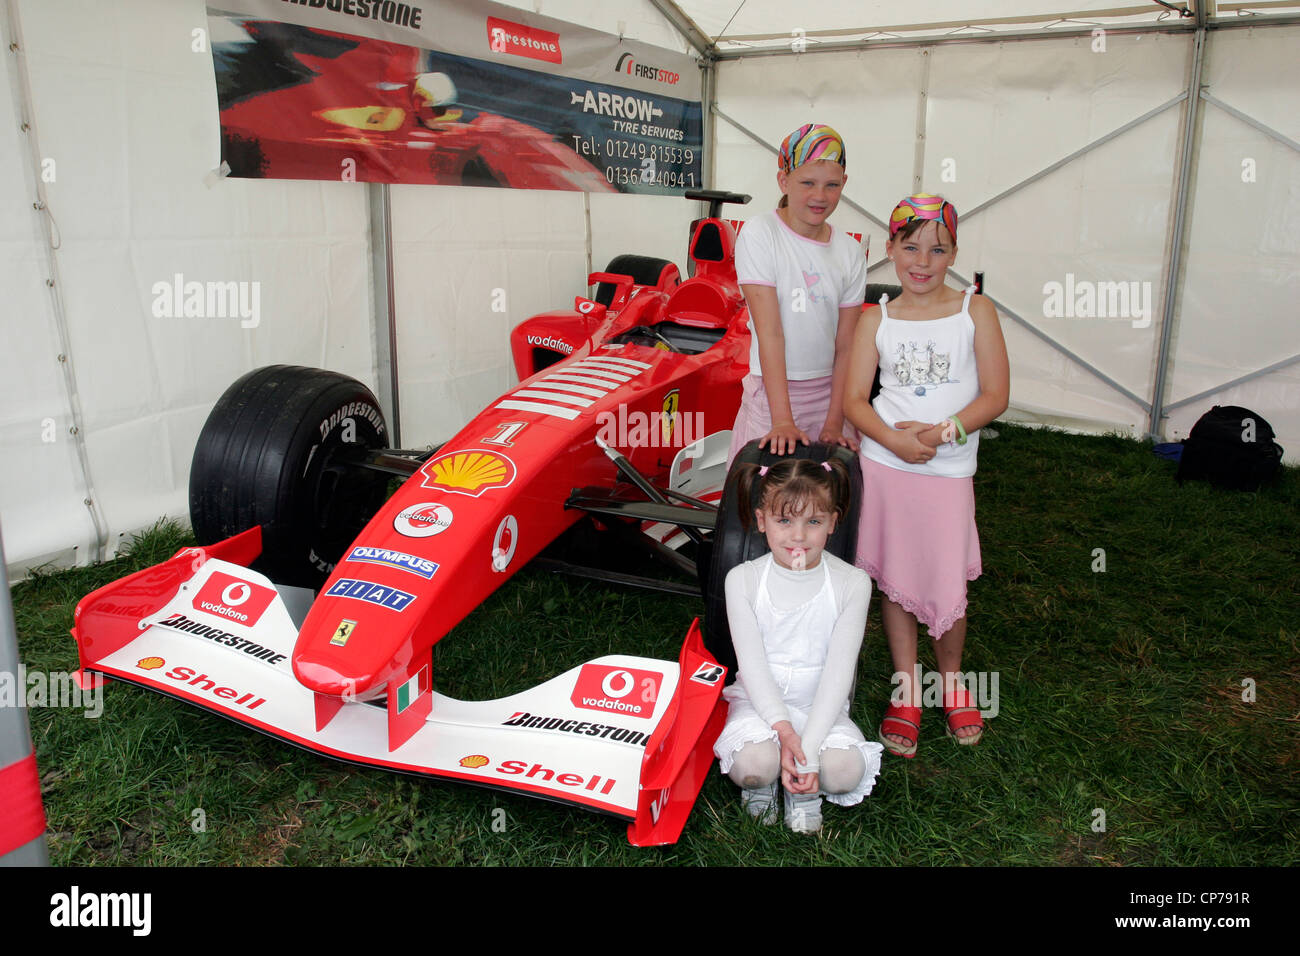 Michael Schumacher's Formula One F1 racing car at the Heddington and Stockley Steam Rally. Stock Photo